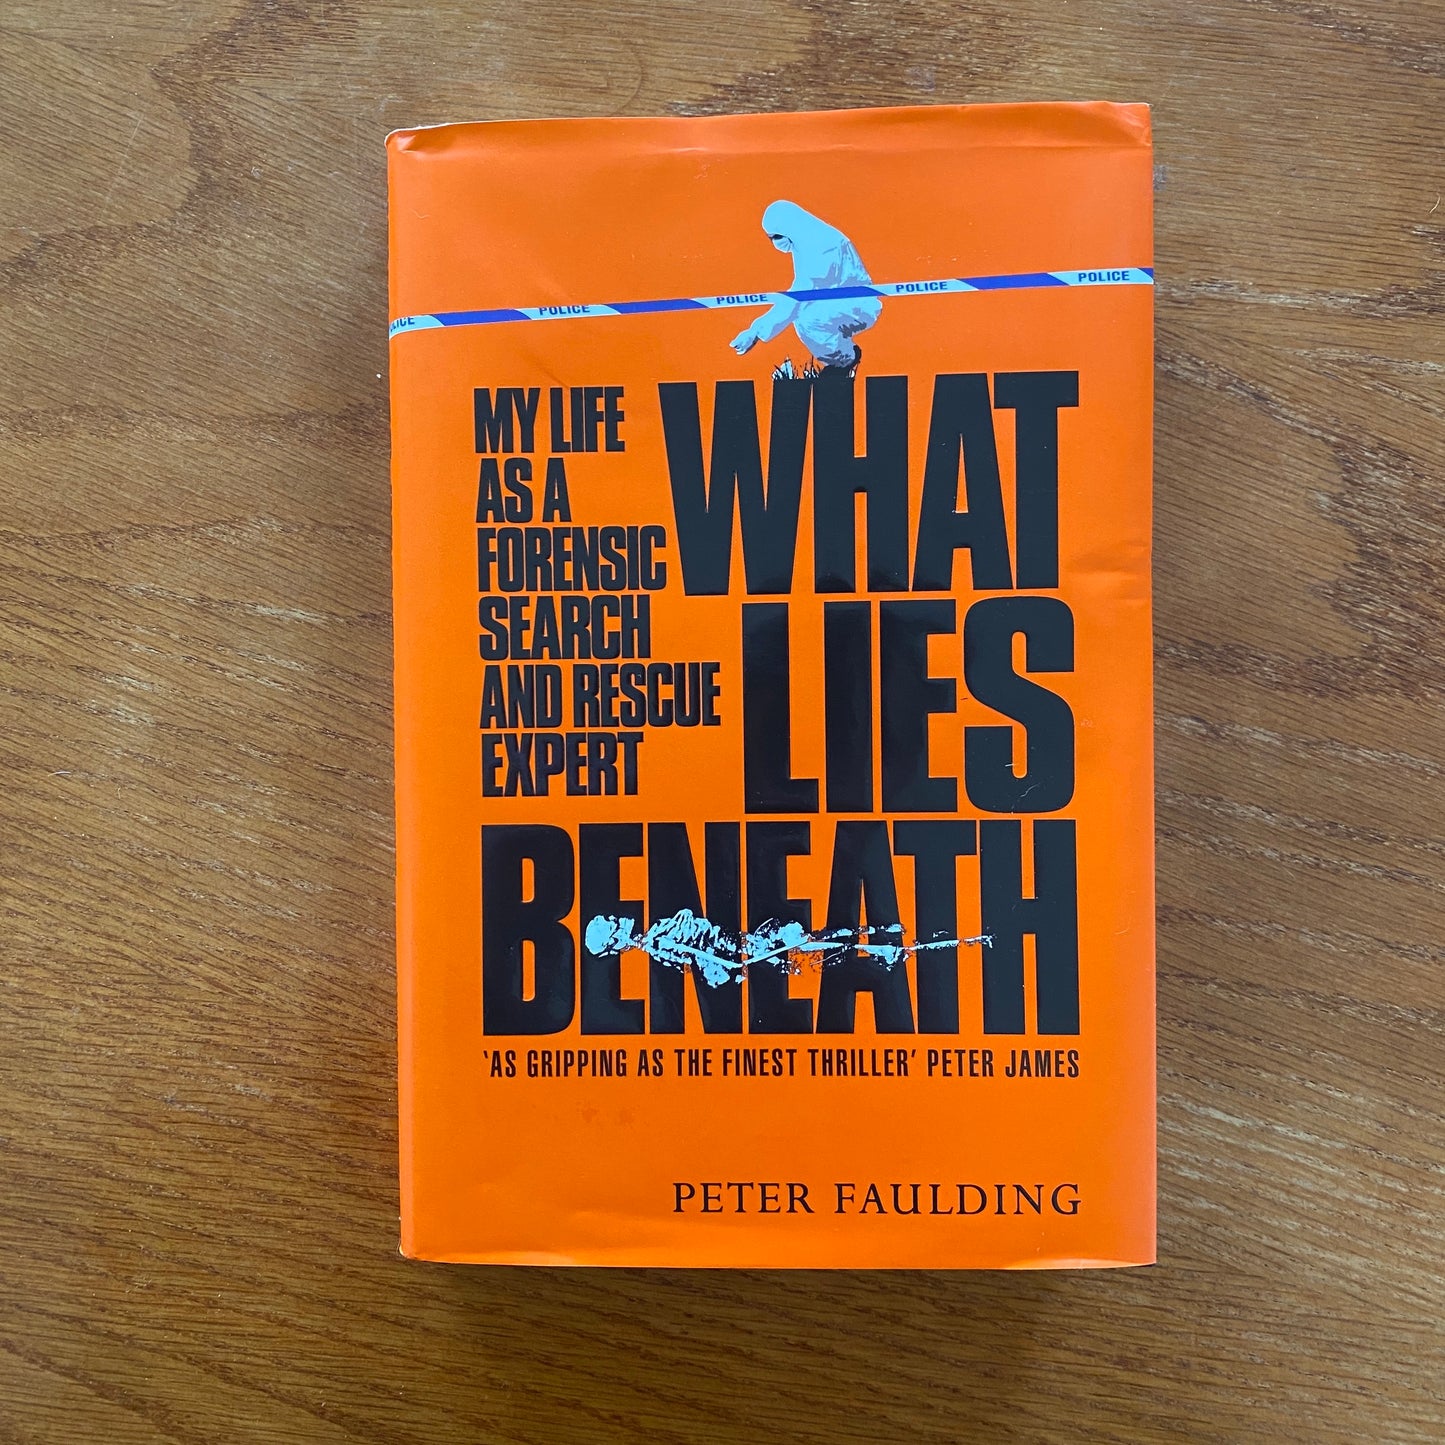 What Lies Beneath: My Life A Forensic Search And Rescue Expert - Peter Faulding